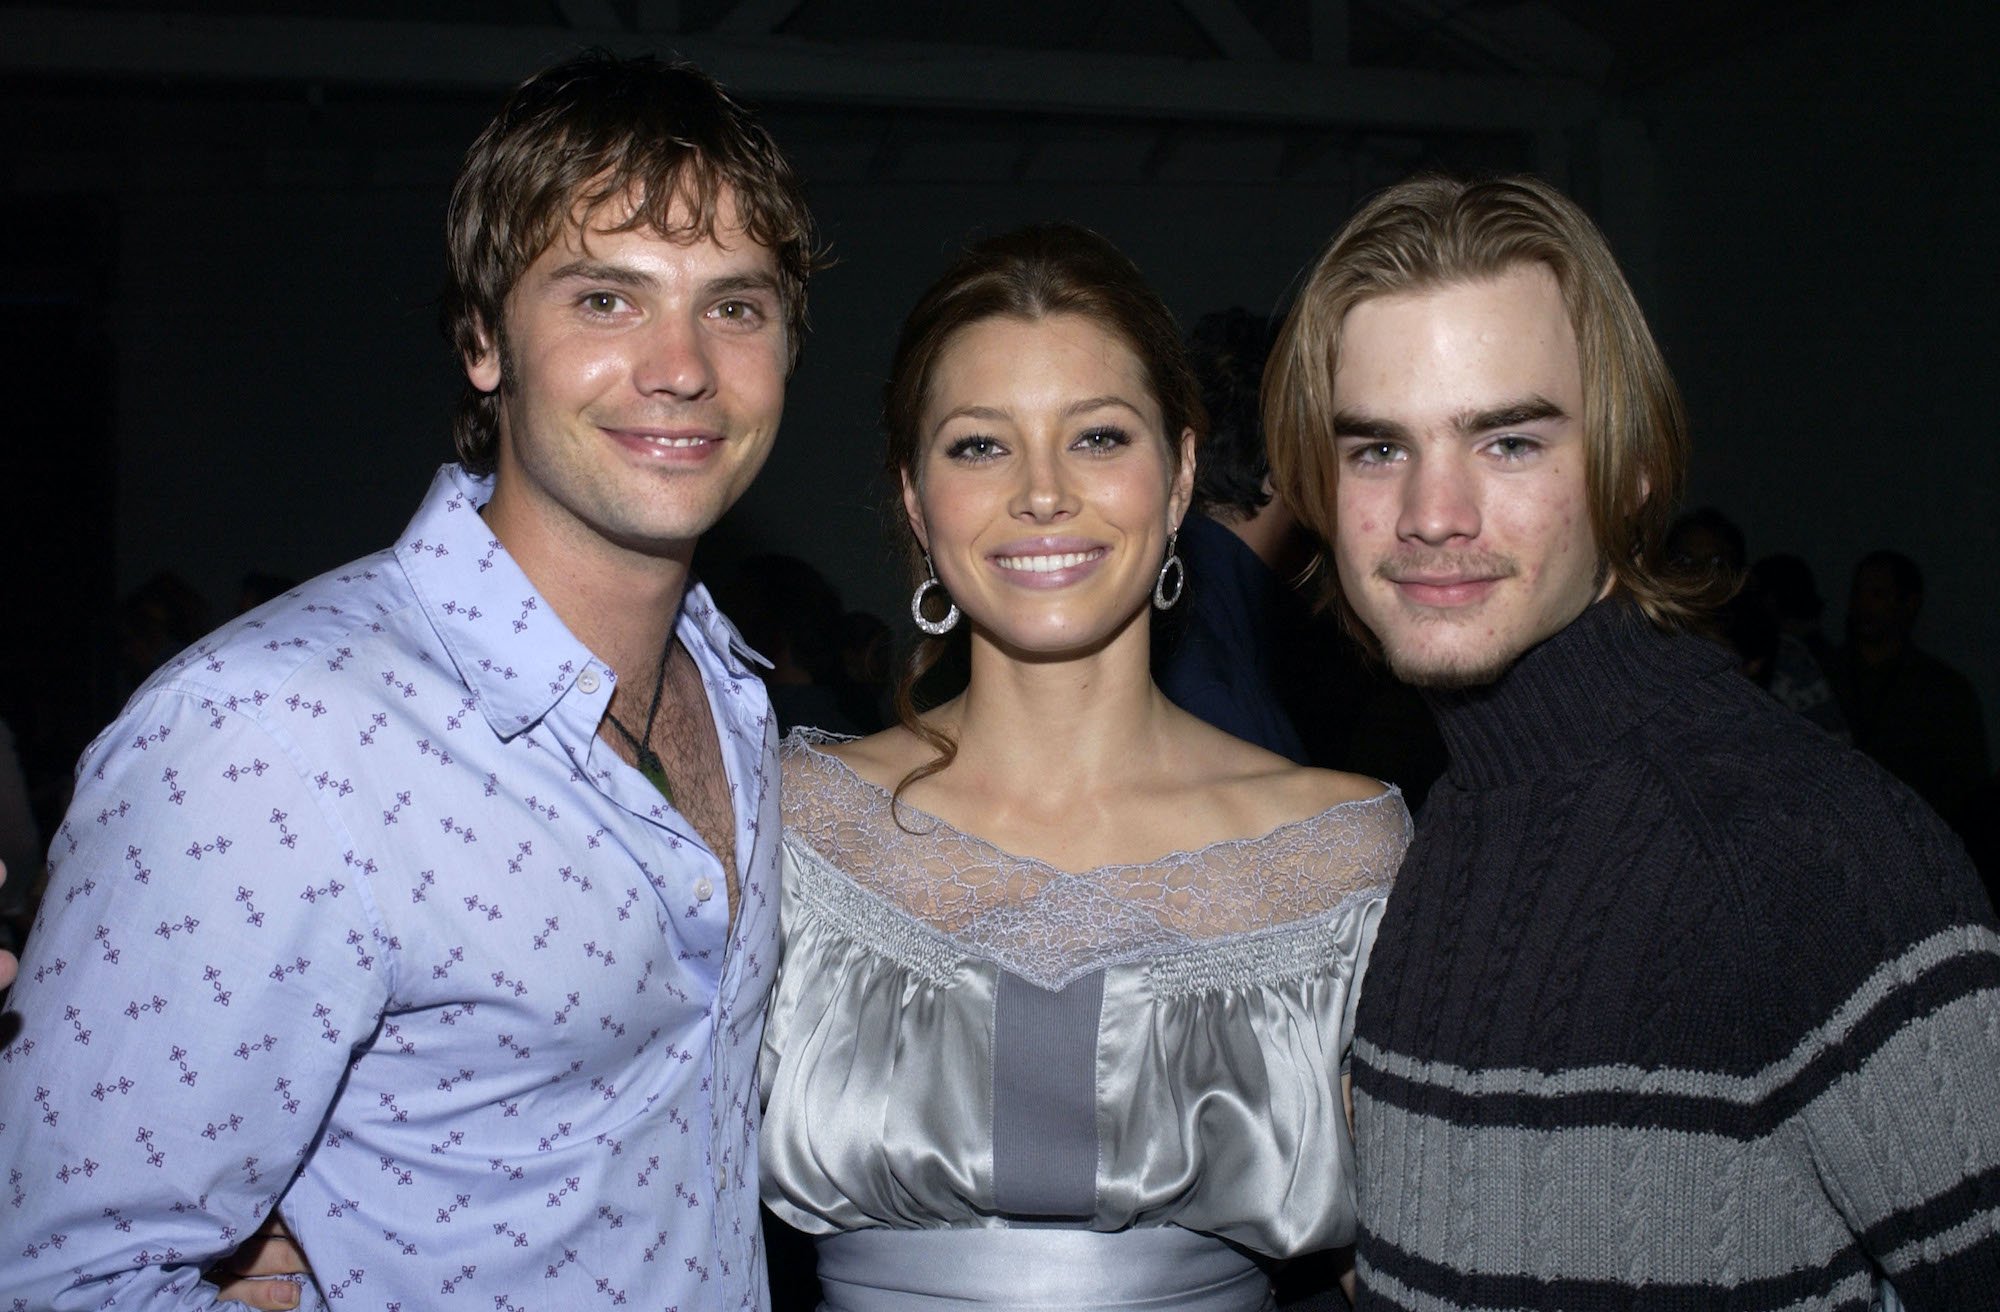 (L-R) Barry Watson, Jessica Biel and David Gallagher smiling at the camera